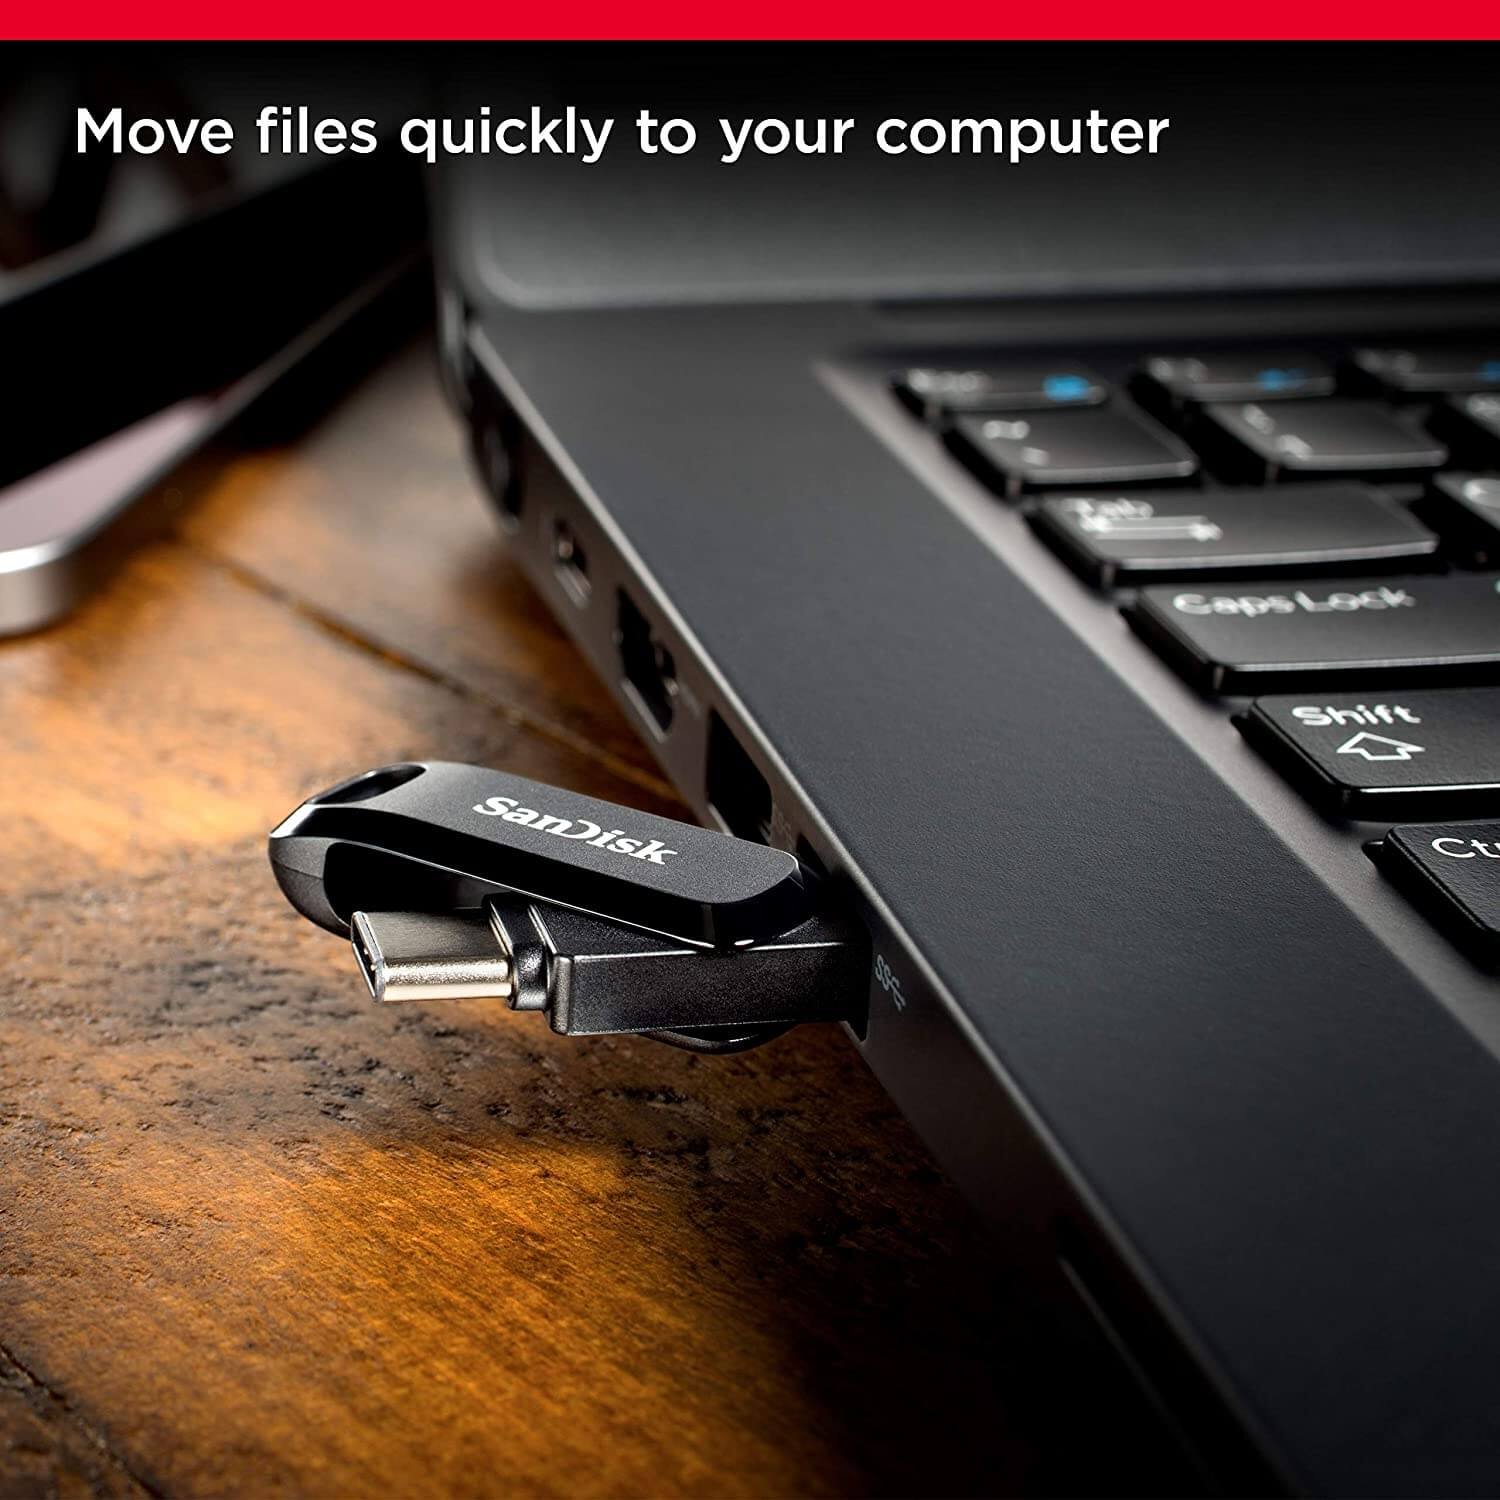 https://shoppingyatra.com/product_images/SanDisk Ultra Dual Drive Go Type C Pendrive2.jpg